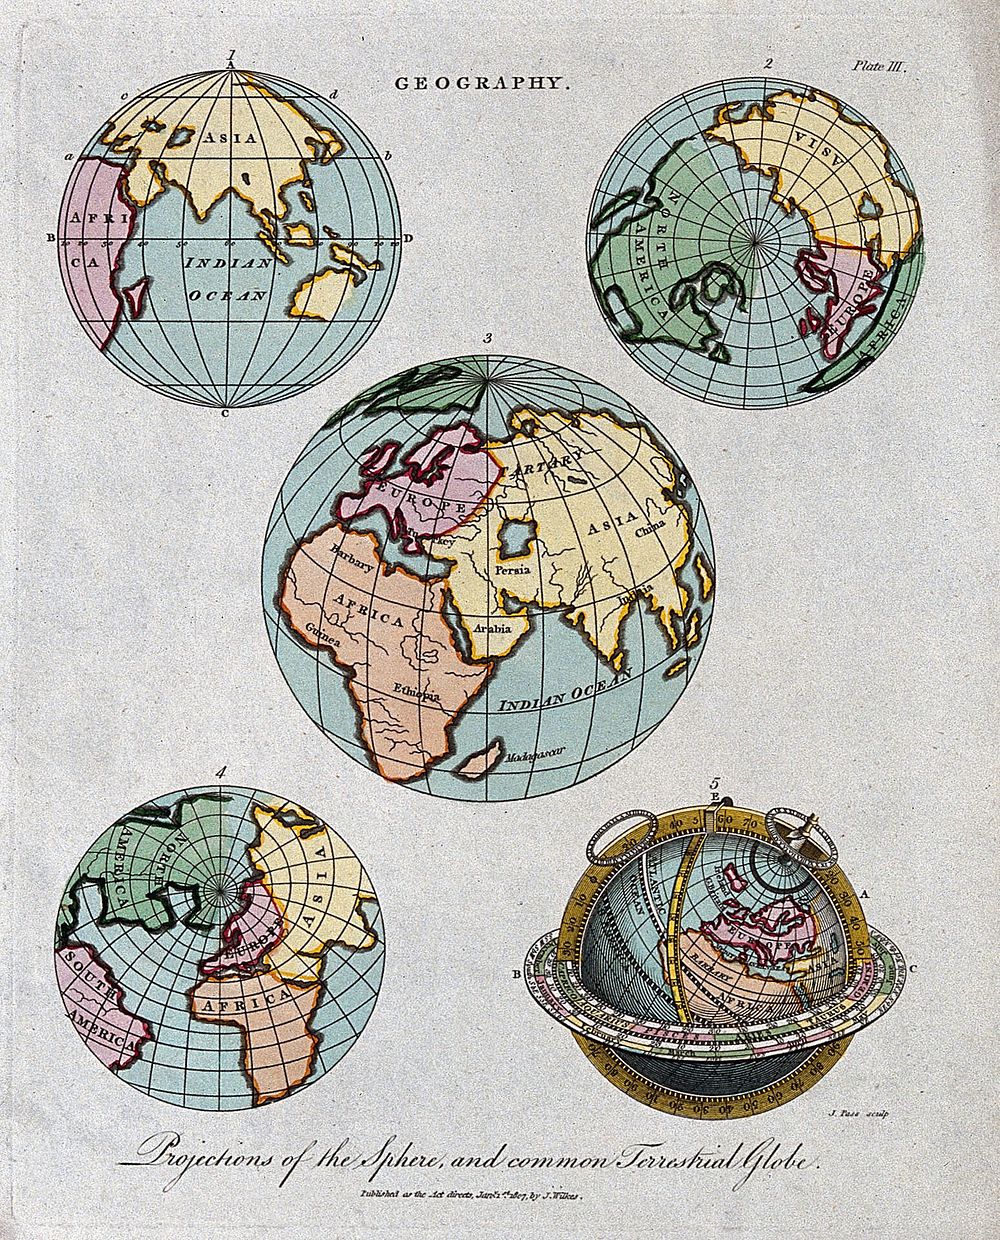 Geography: the hemispheres of a globe. Engraving by J. Pass, 1807.